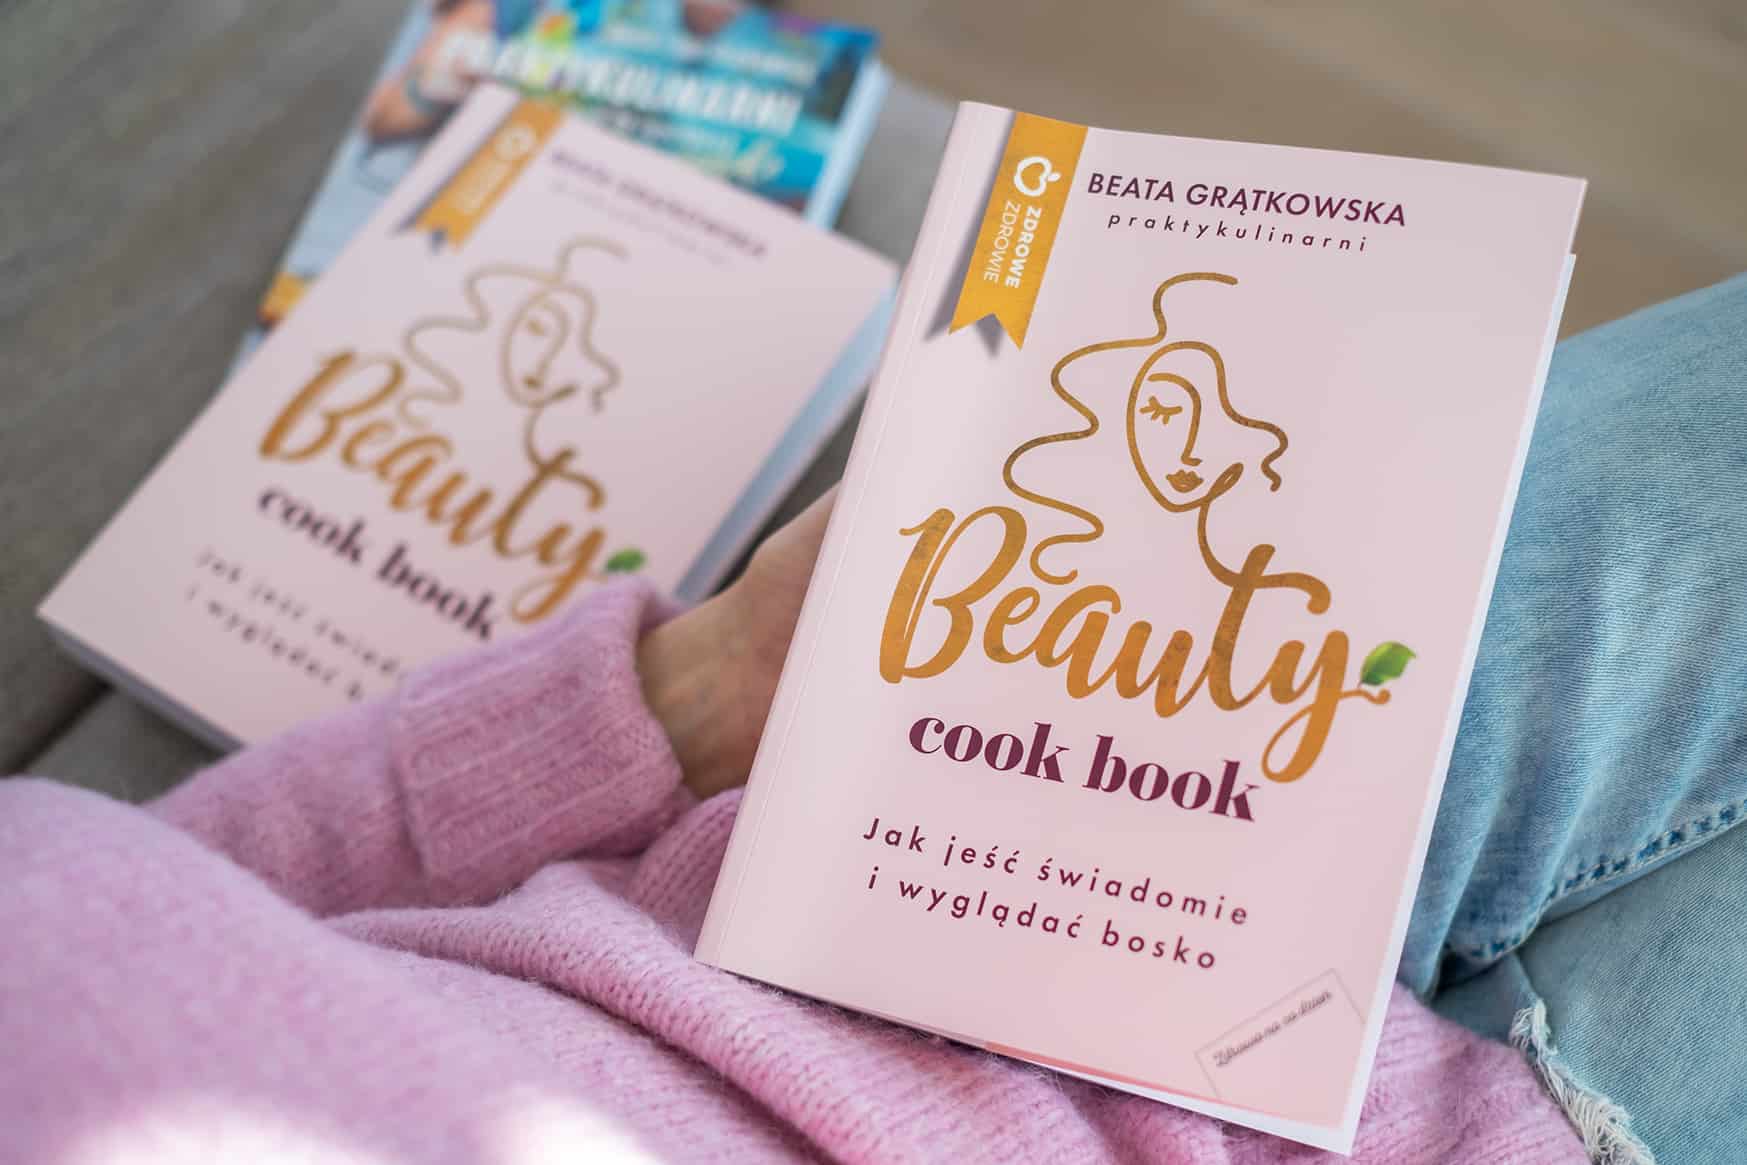 beauty cook book